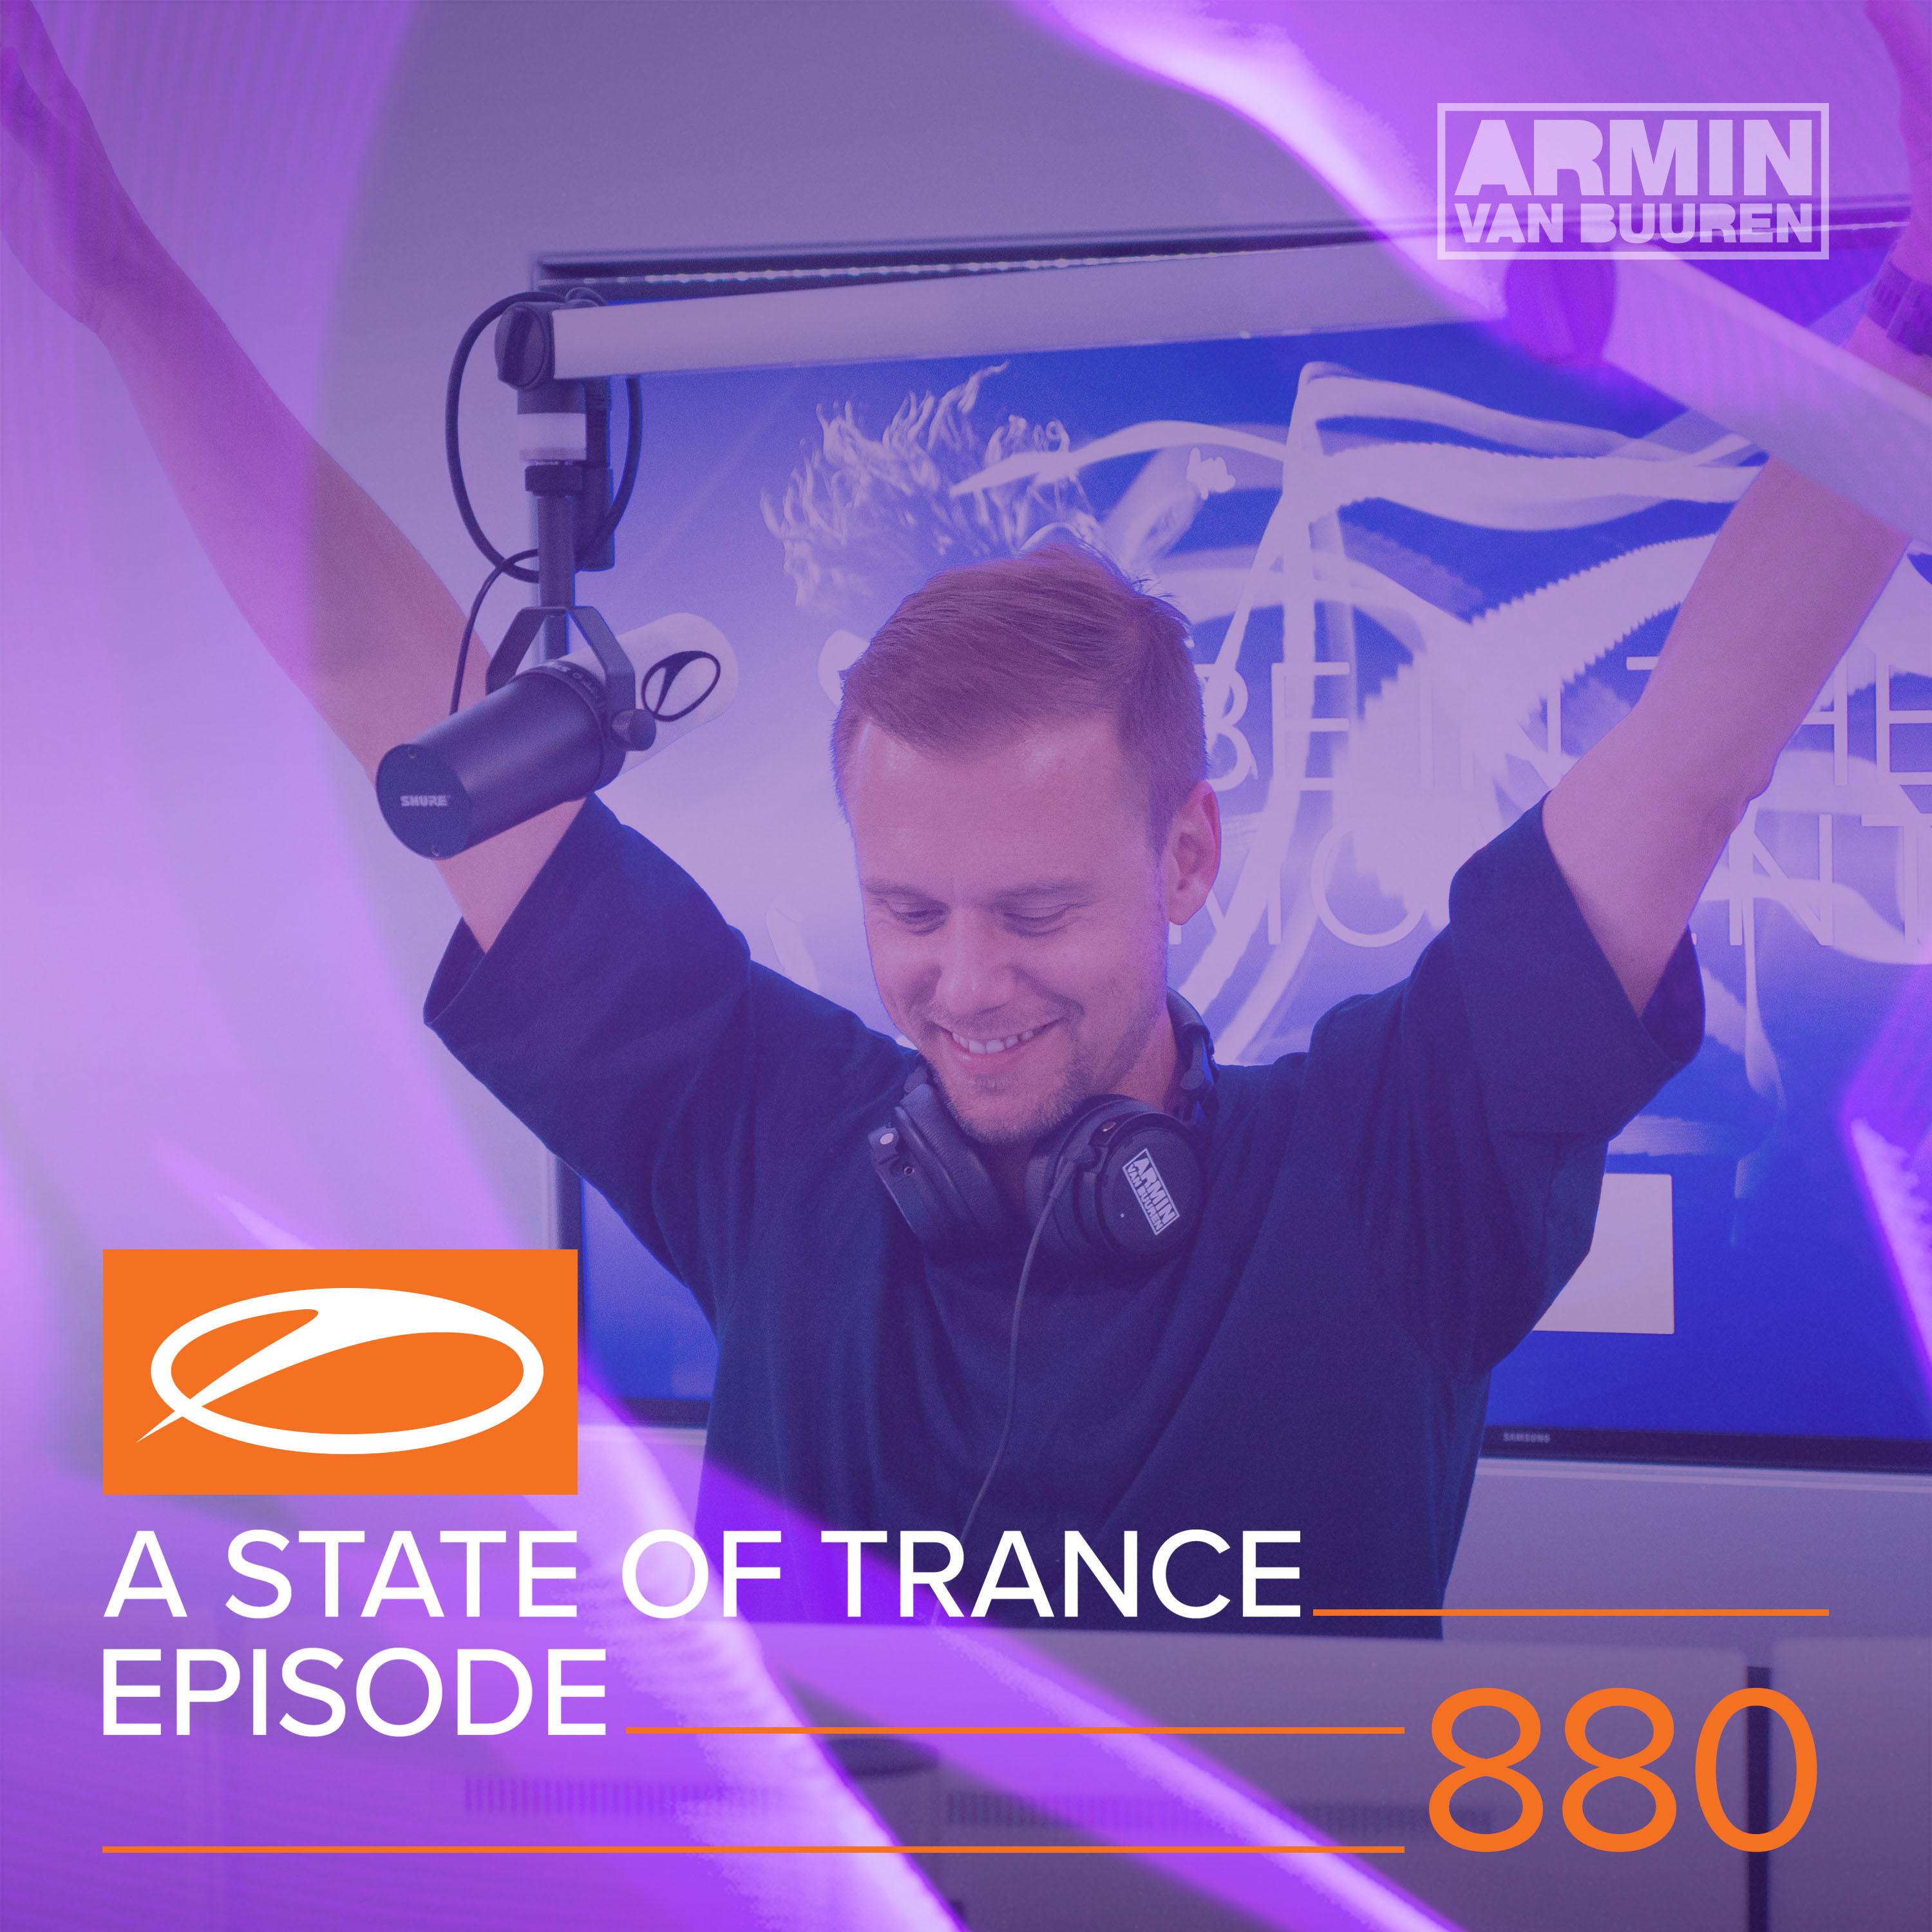 A State Of Trance (ASOT 880) (Coming Up, Pt. 1)